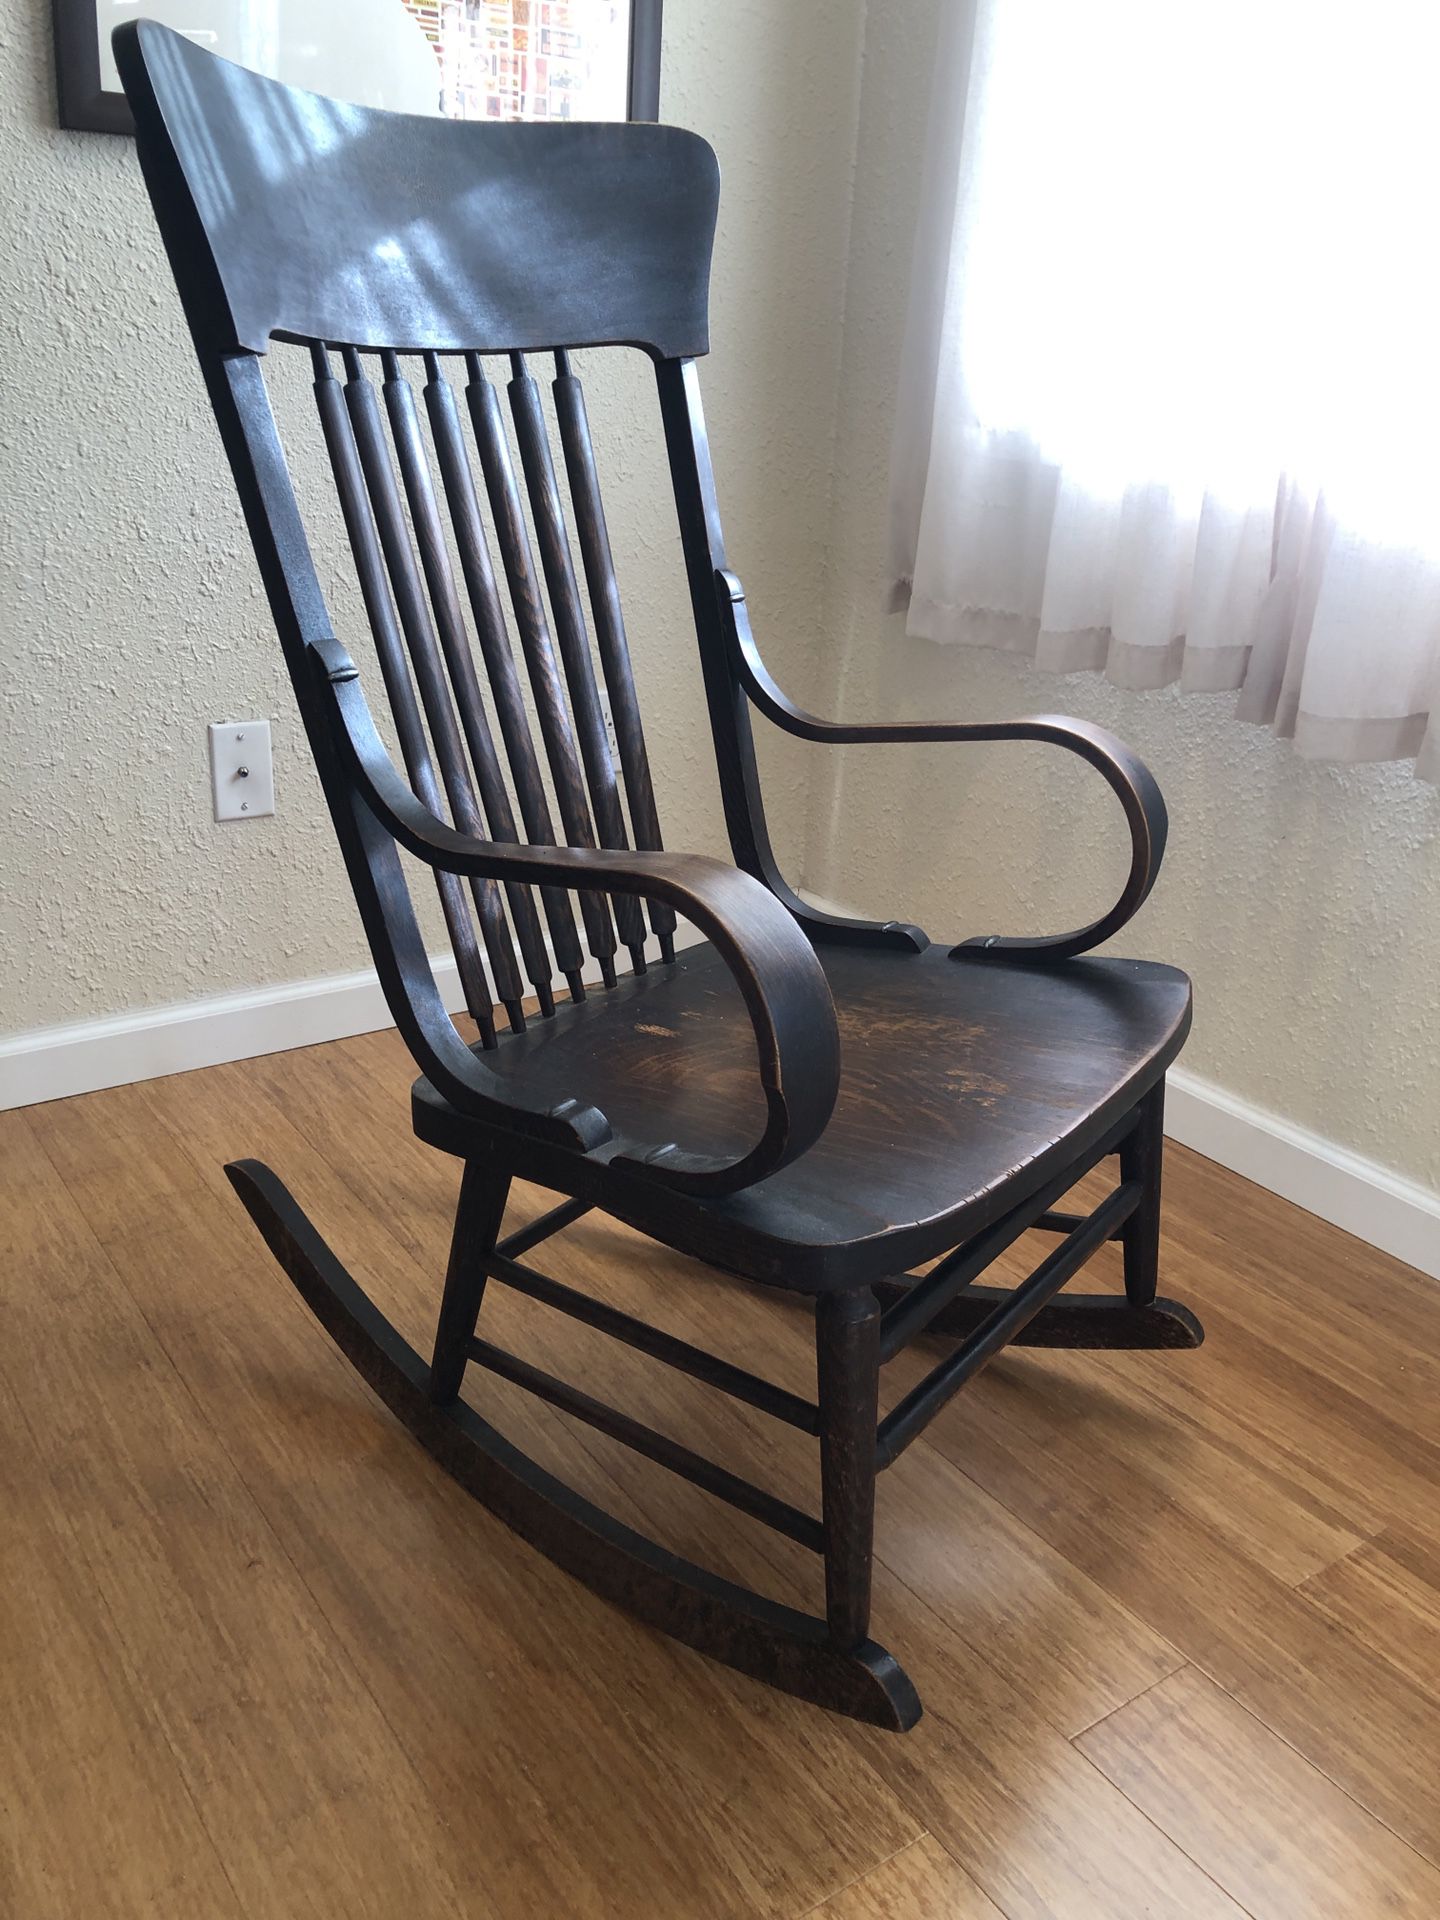 Antique Bent Wood Rocking Chairs